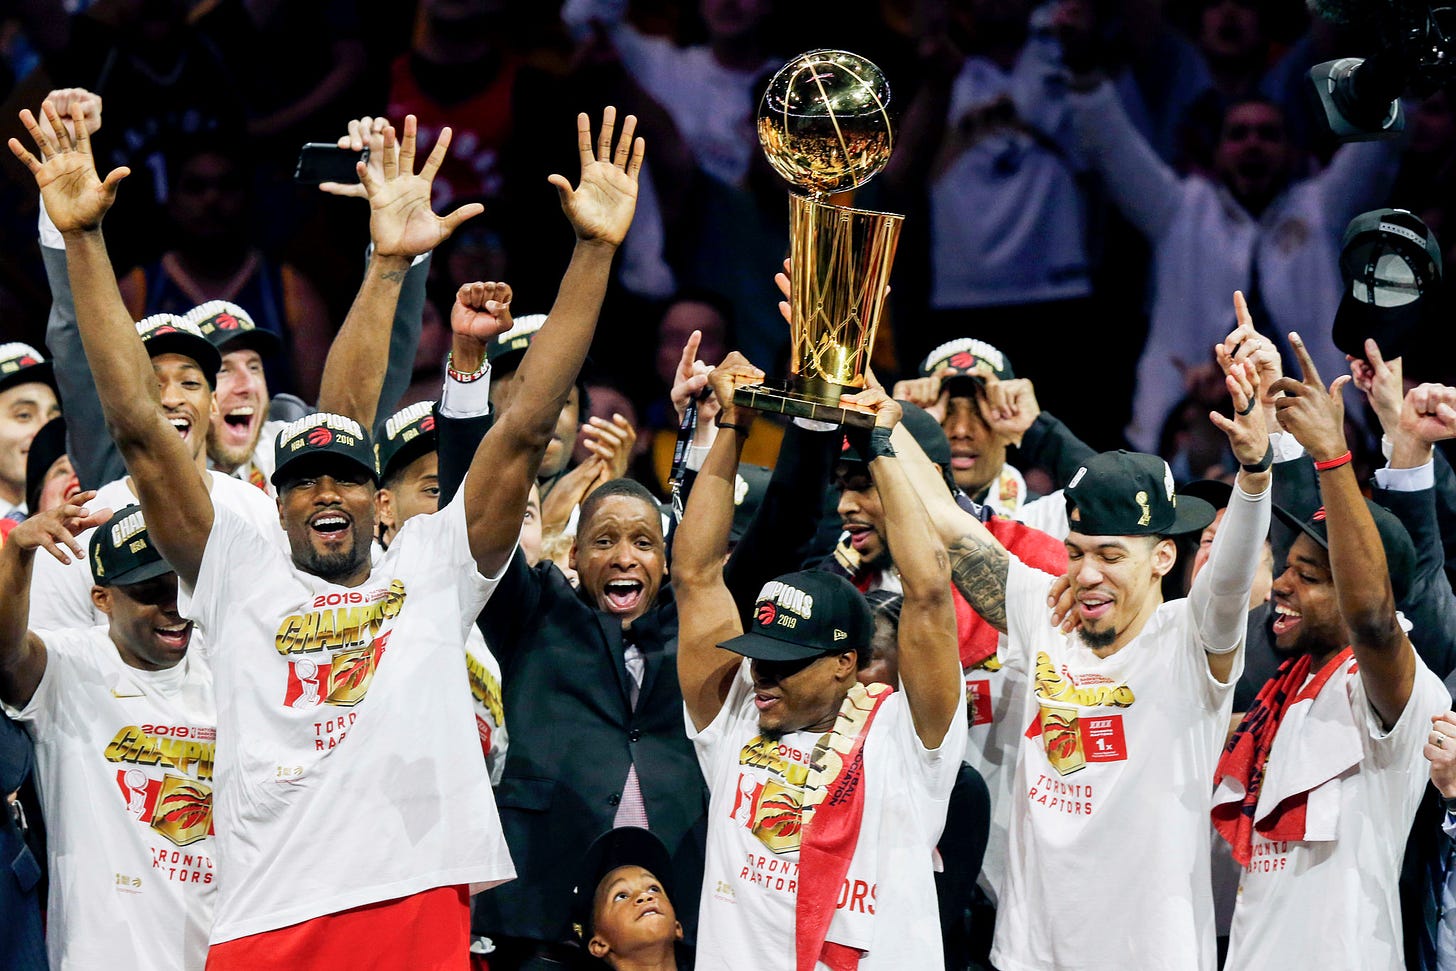 How the Raptors Won Their First N.B.A. Championship - The New York Times